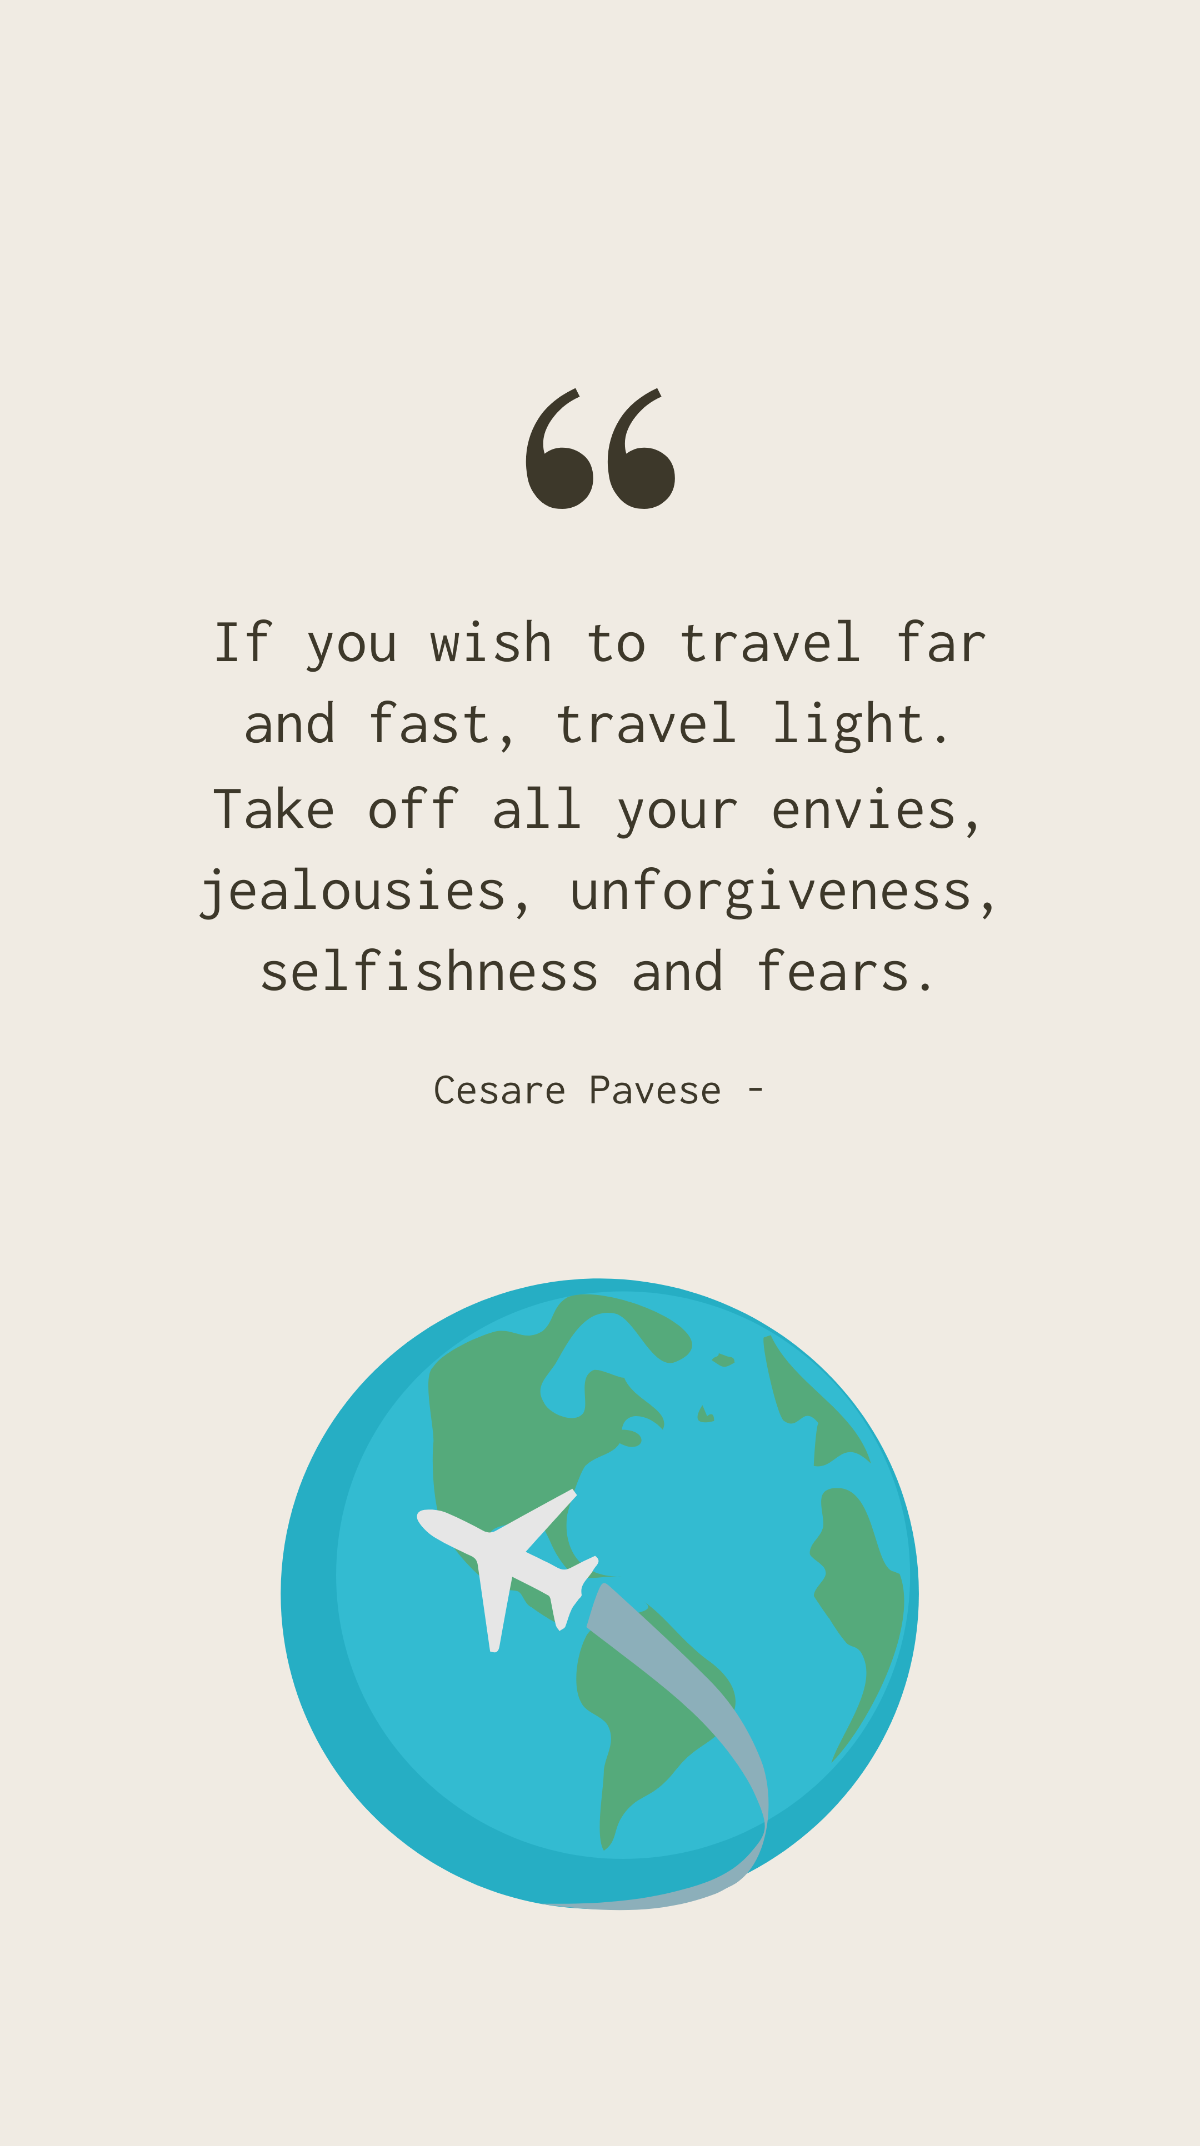 Cesare Pavese - If you wish to travel far and fast, travel light. Take off all your envies, jealousies, unforgiveness, selfishness and fears. Template